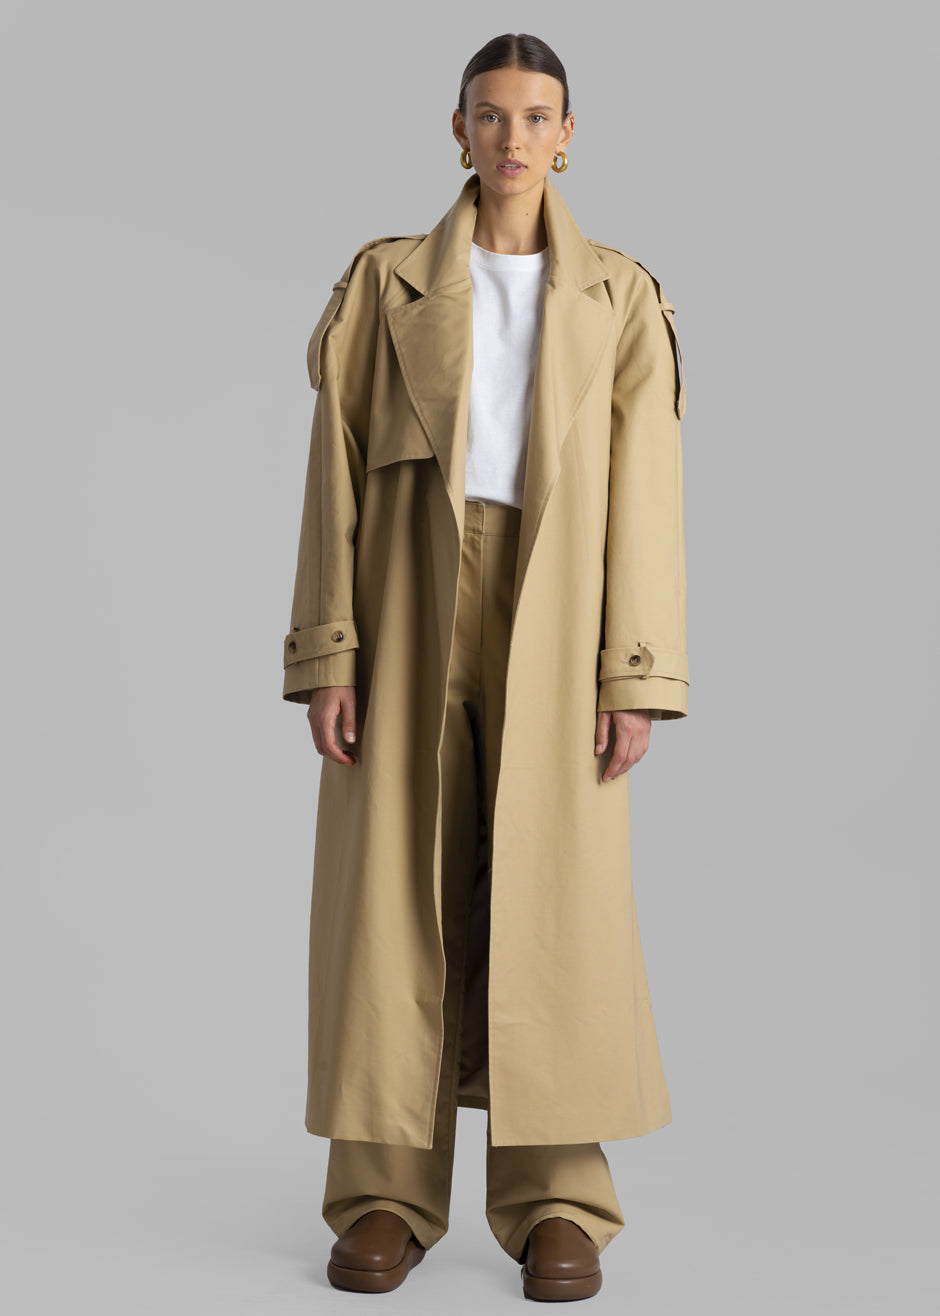 Suzanne Trench Coat - Beige - 7